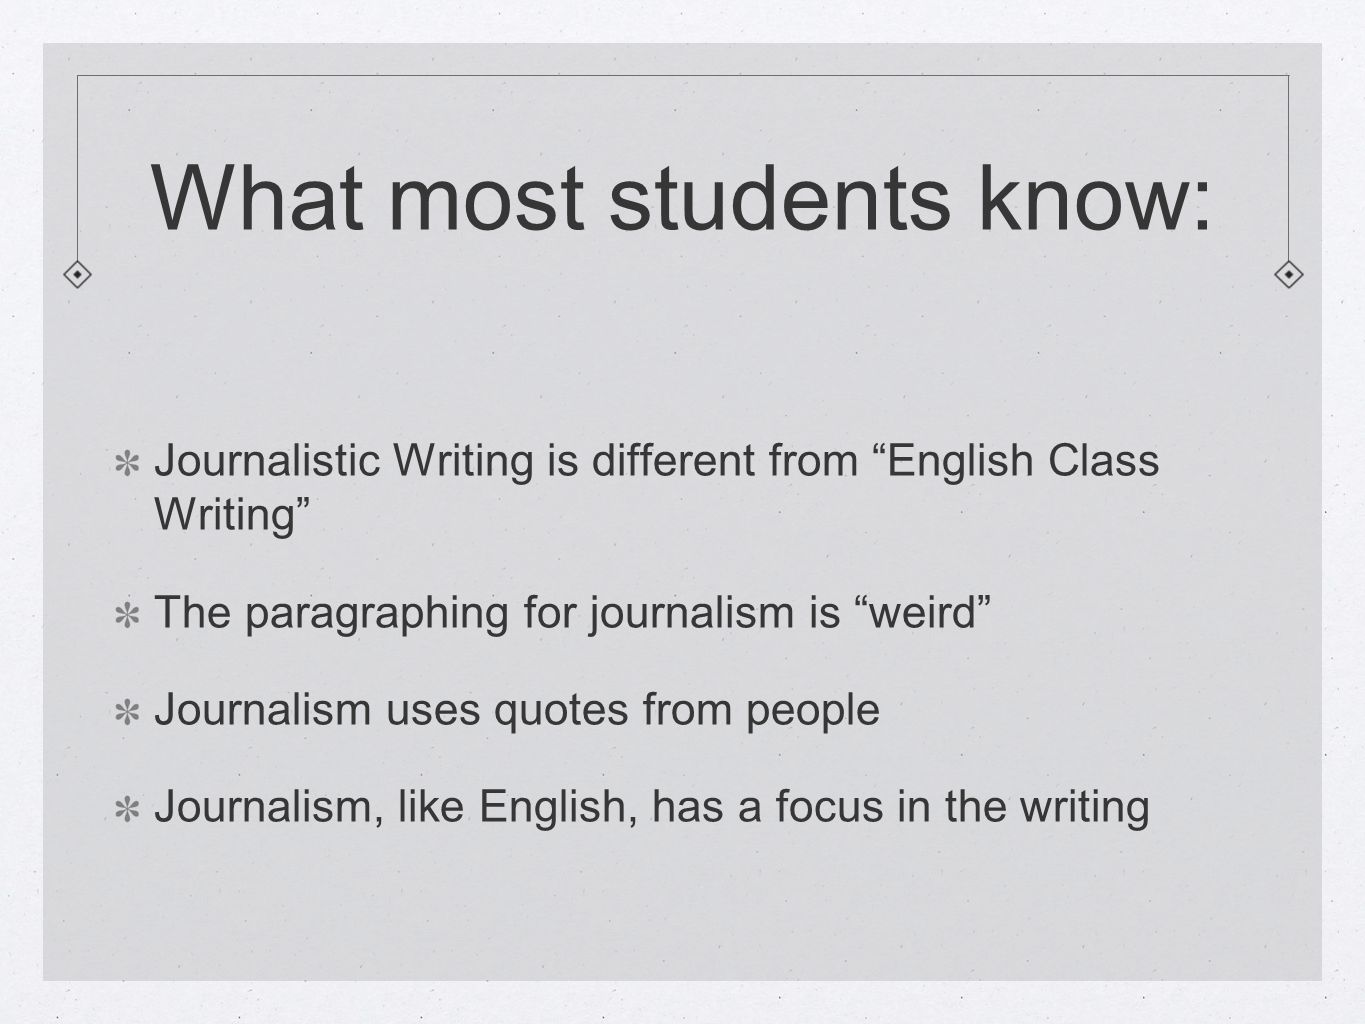 What most students know: Journalistic Writing is different from English Class Writing The paragraphing for journalism is weird Journalism uses quotes from people Journalism, like English, has a focus in the writing